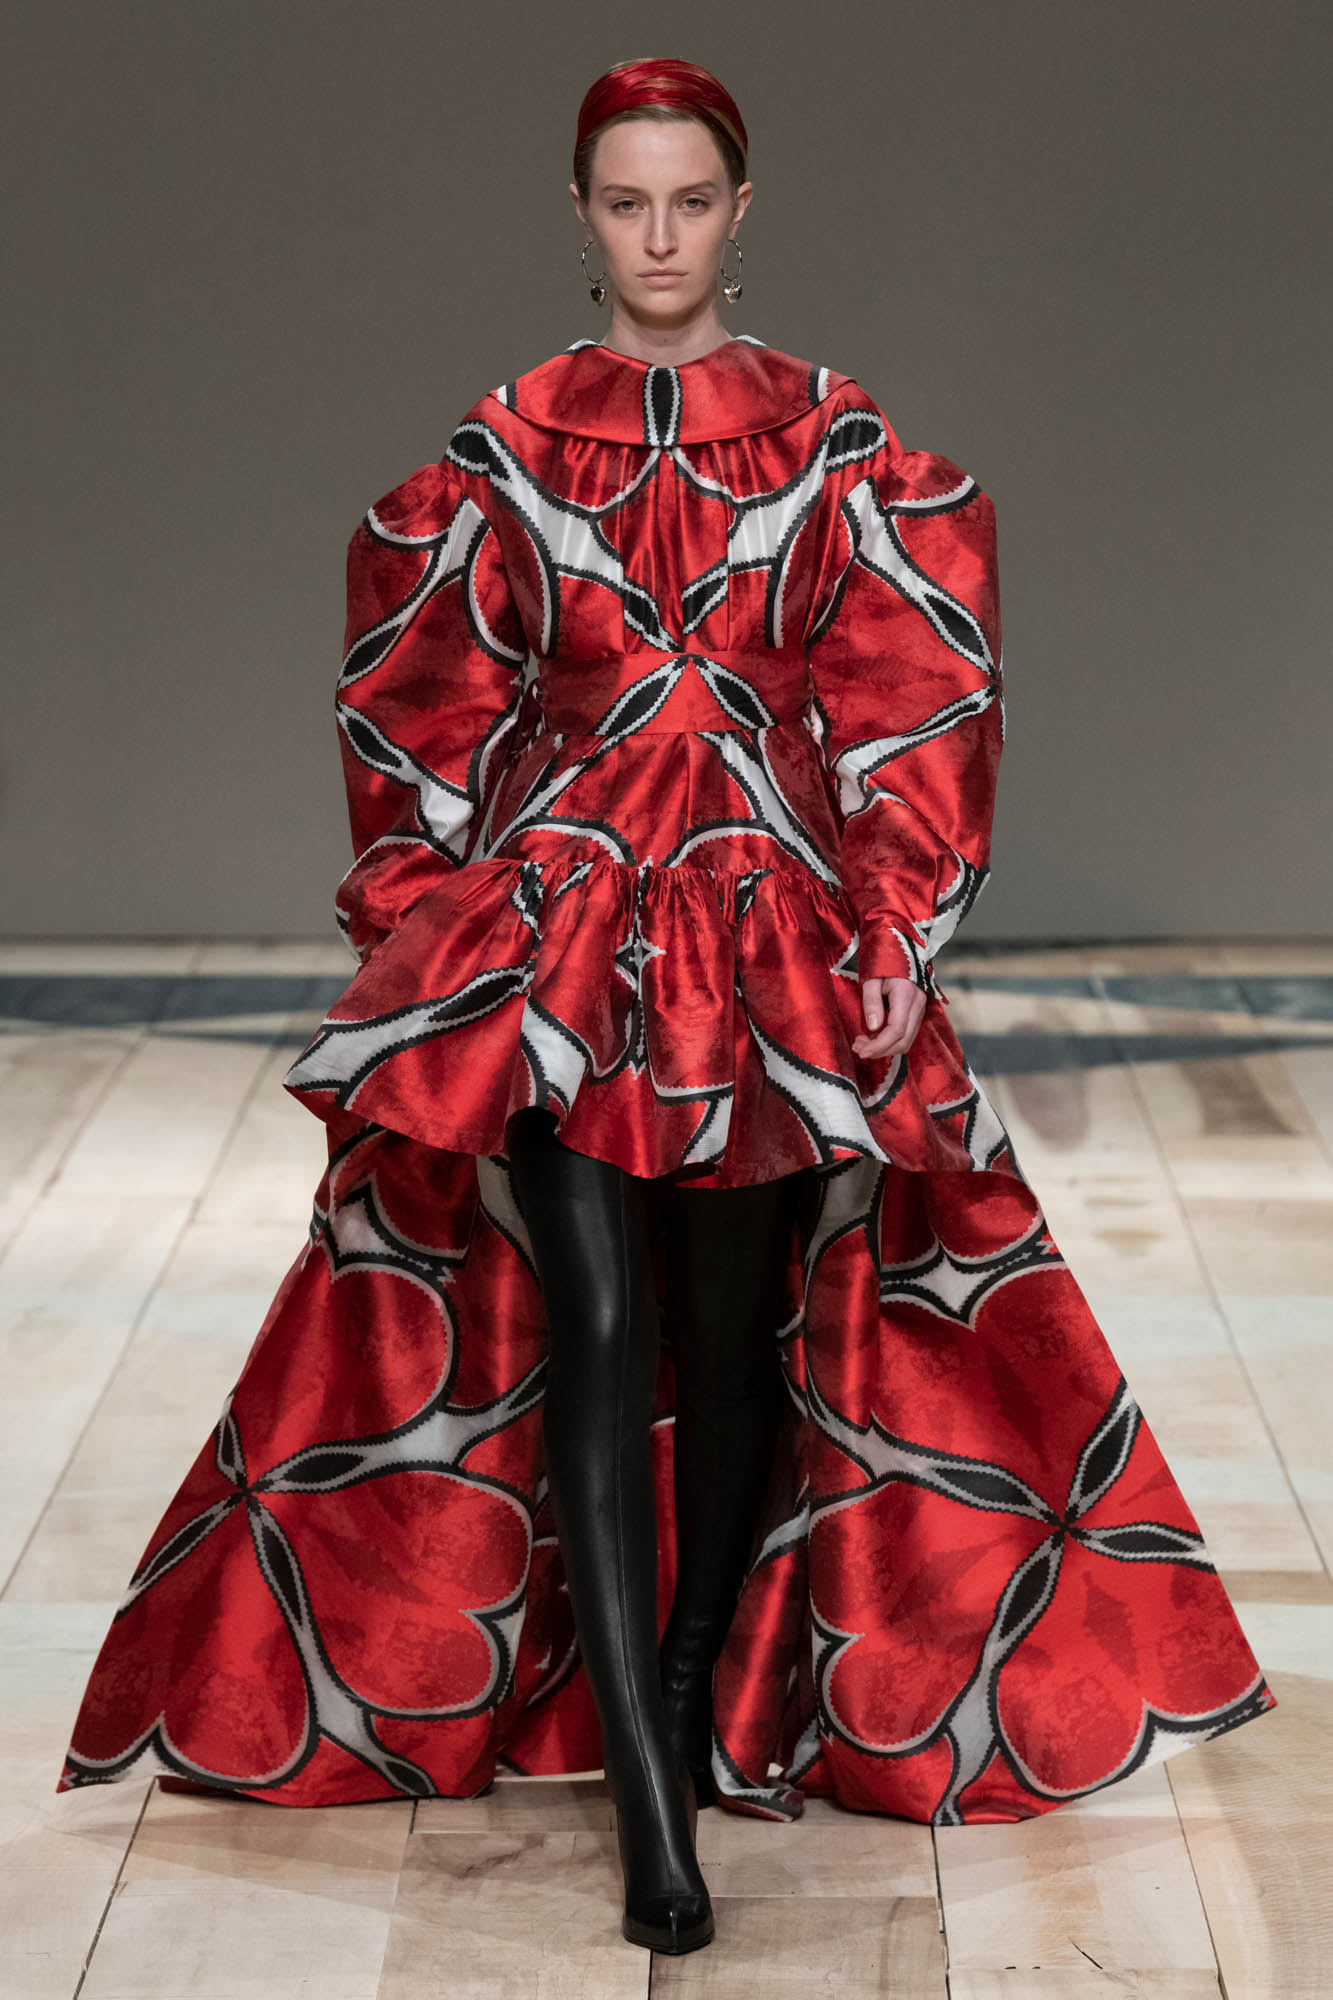 ALEXANDER MCQUEEN FALL WINTER 2020 WOMEN'S COLLECTION | The Skinny Beep